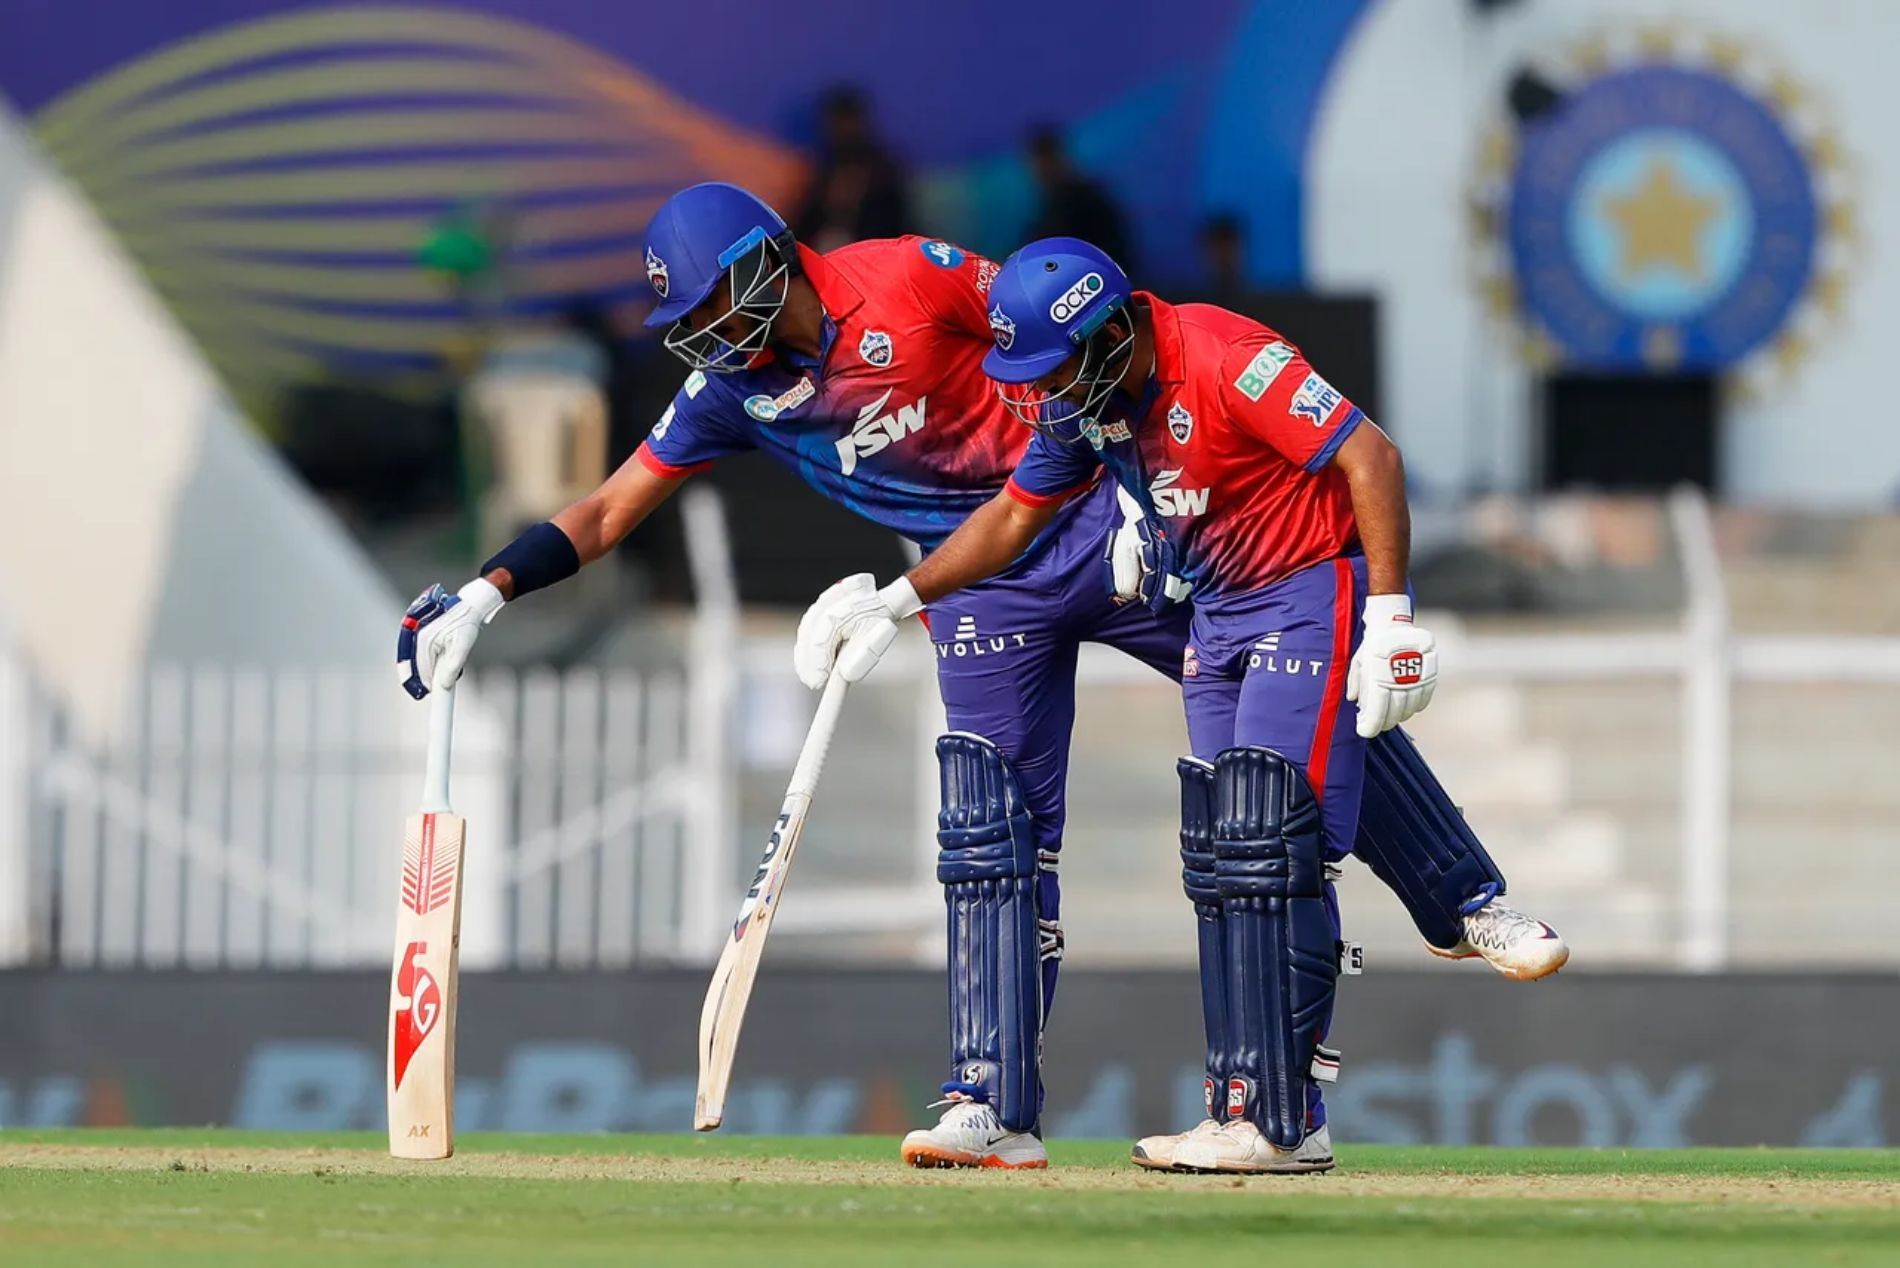 Delhi Capitals&rsquo; Axar Patel and Shardul Thakur are captured in sync rather elegantly during their destructive partnership against the Kolkata Knight Riders (KKR) in Match 19.